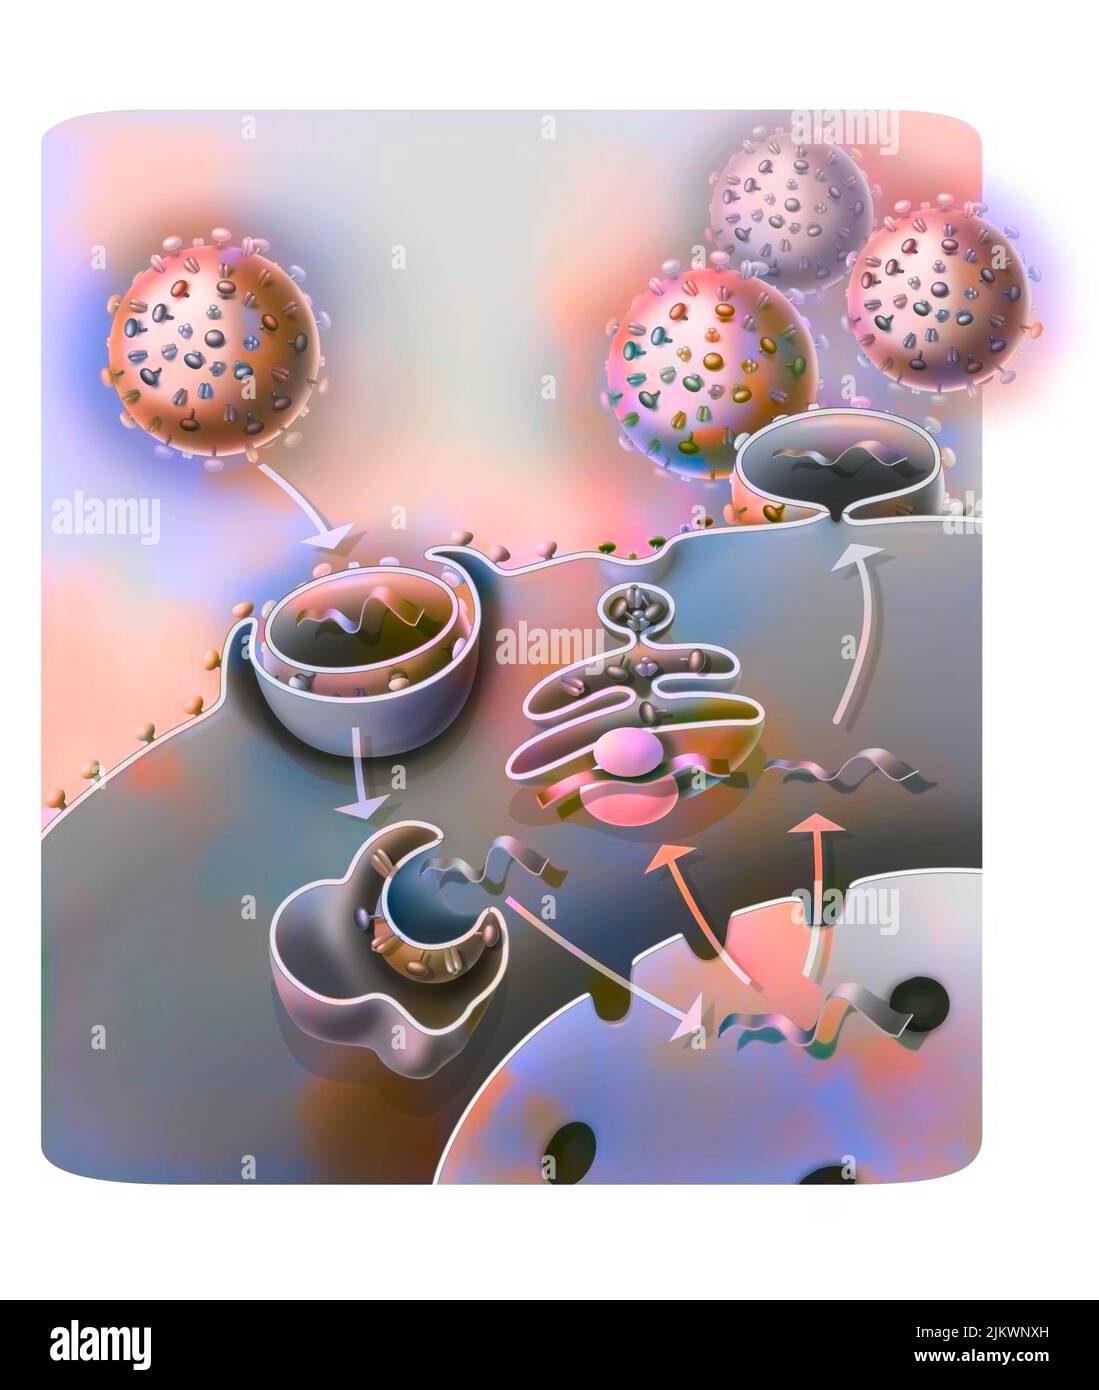 Penetration and replication of the H1N1 virus through a host cell. Stock Photo